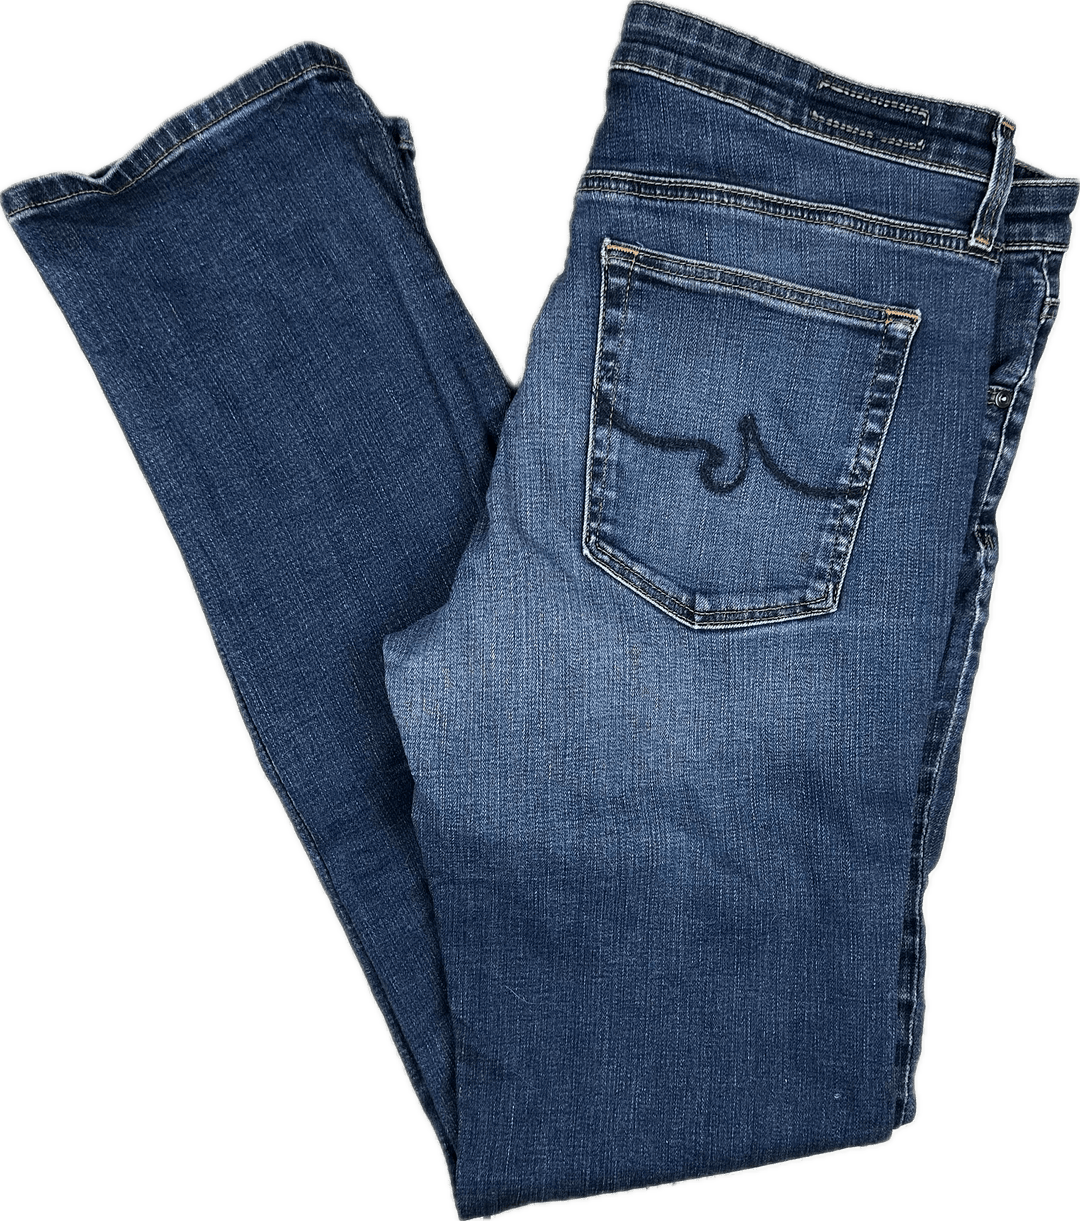 AG Adriano Goldschmied 'The Harper' Essential Straight Jeans- Size 31R - Jean Pool